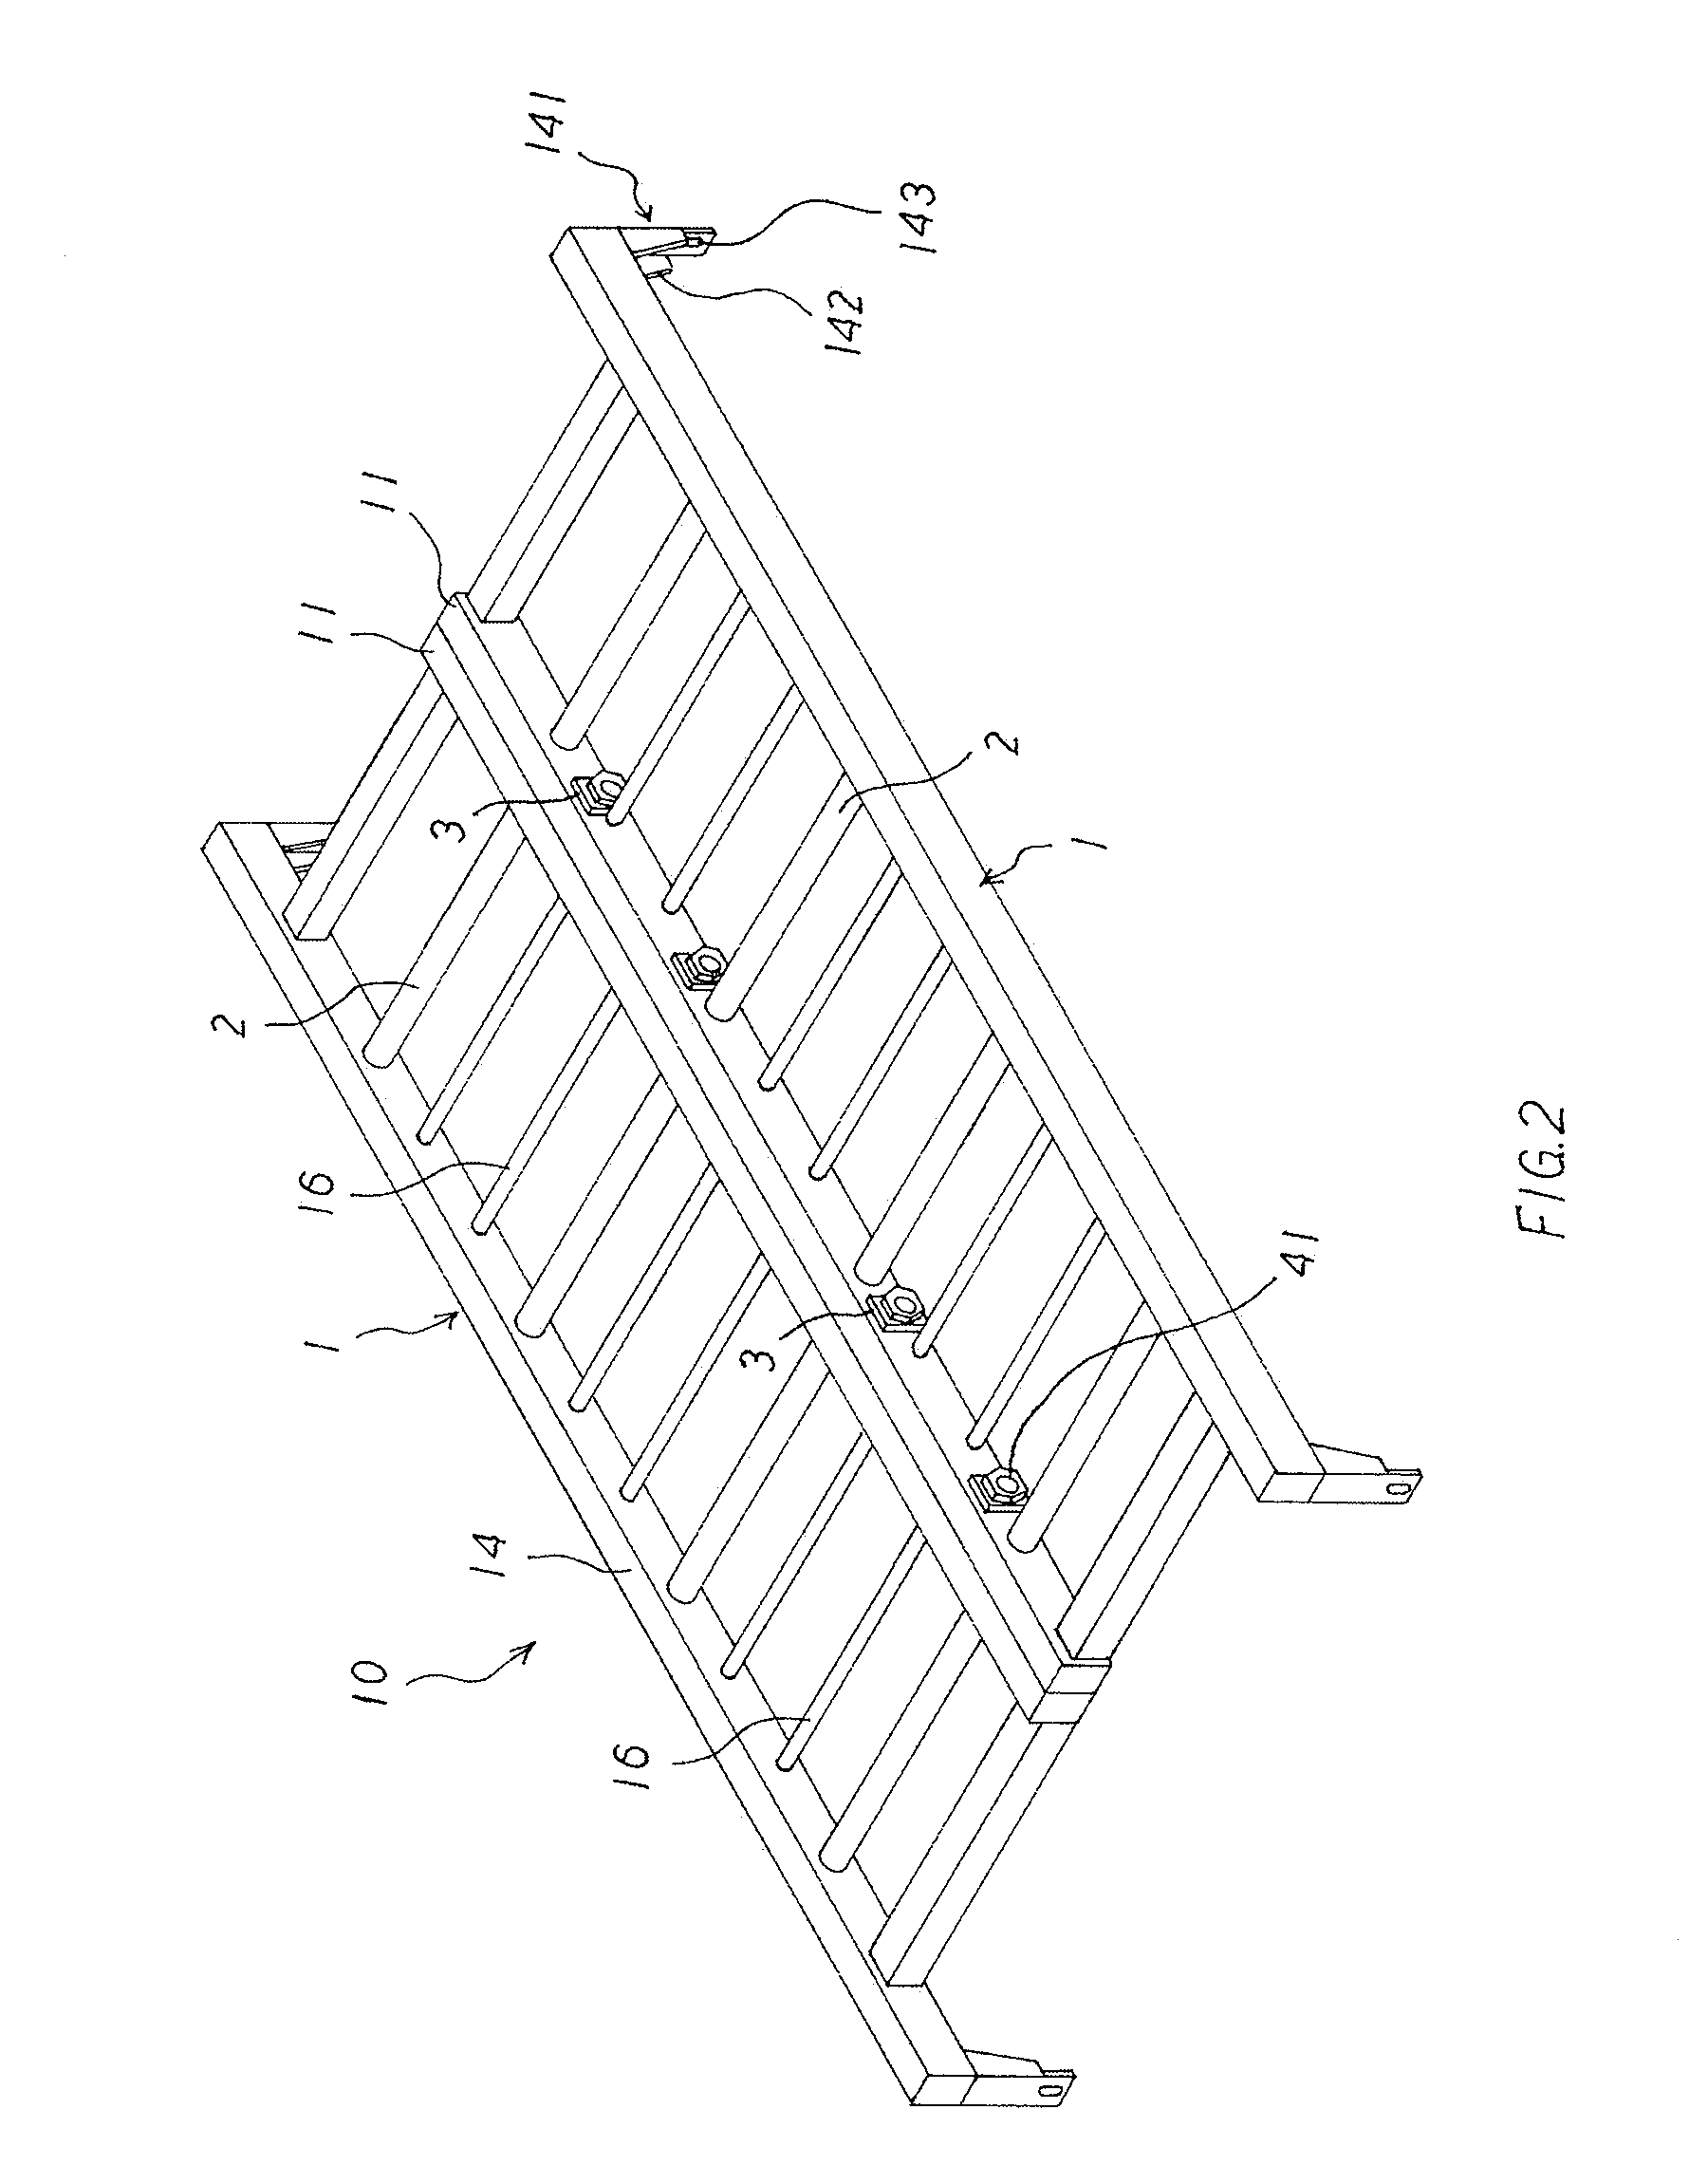 Bed panel structure